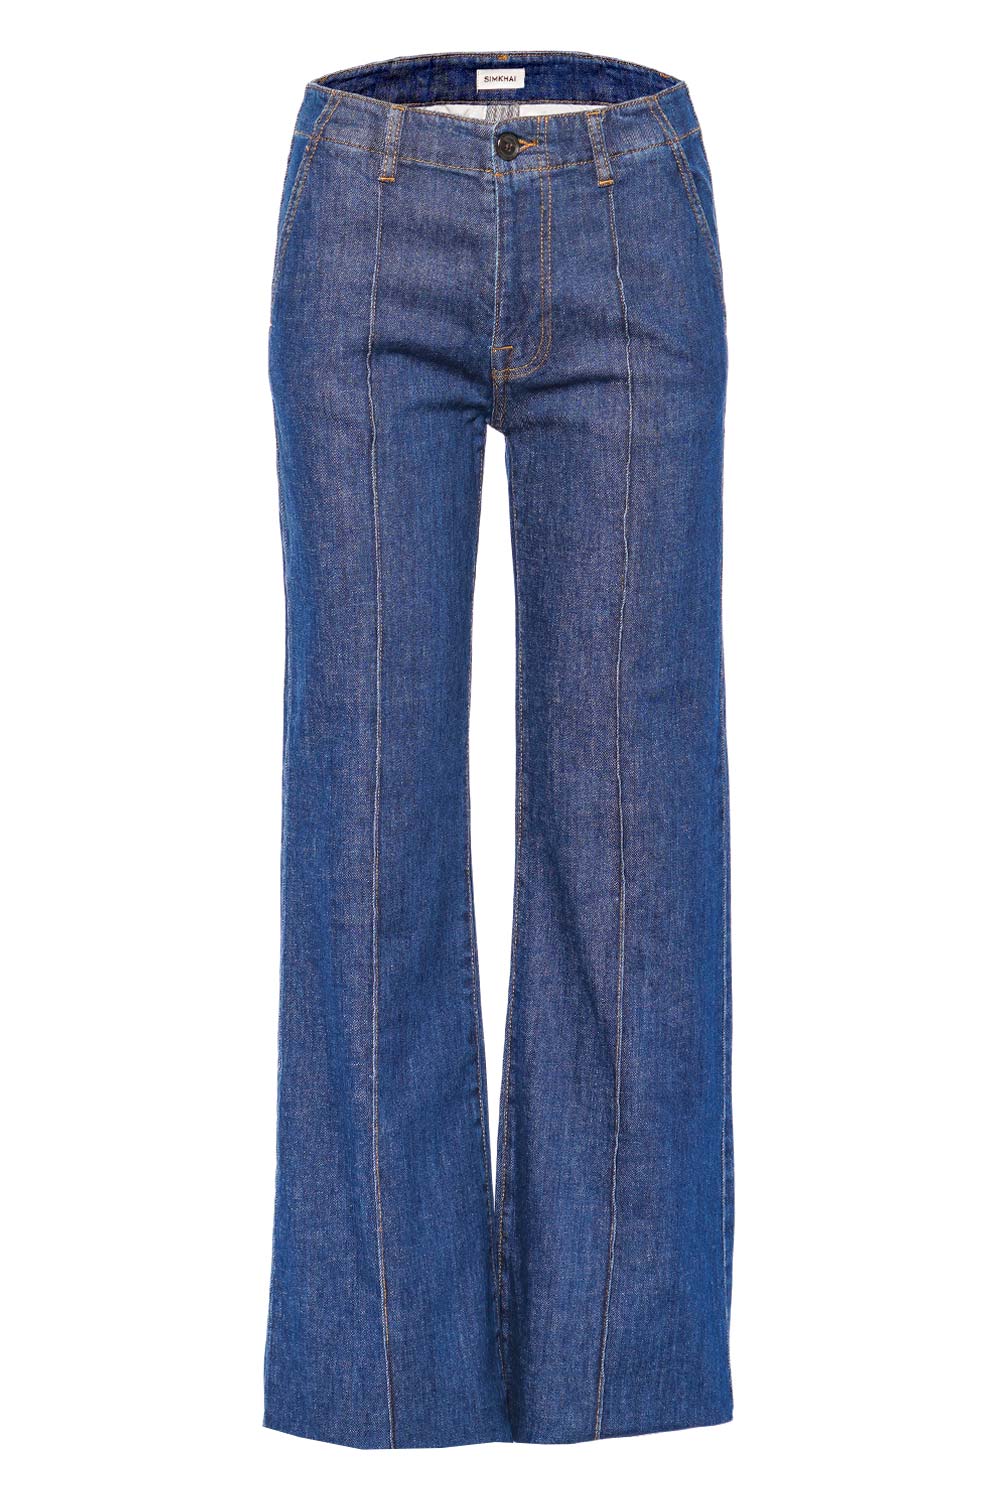 SIMKHAI Ansel Imperial High Rise Flare Jeans